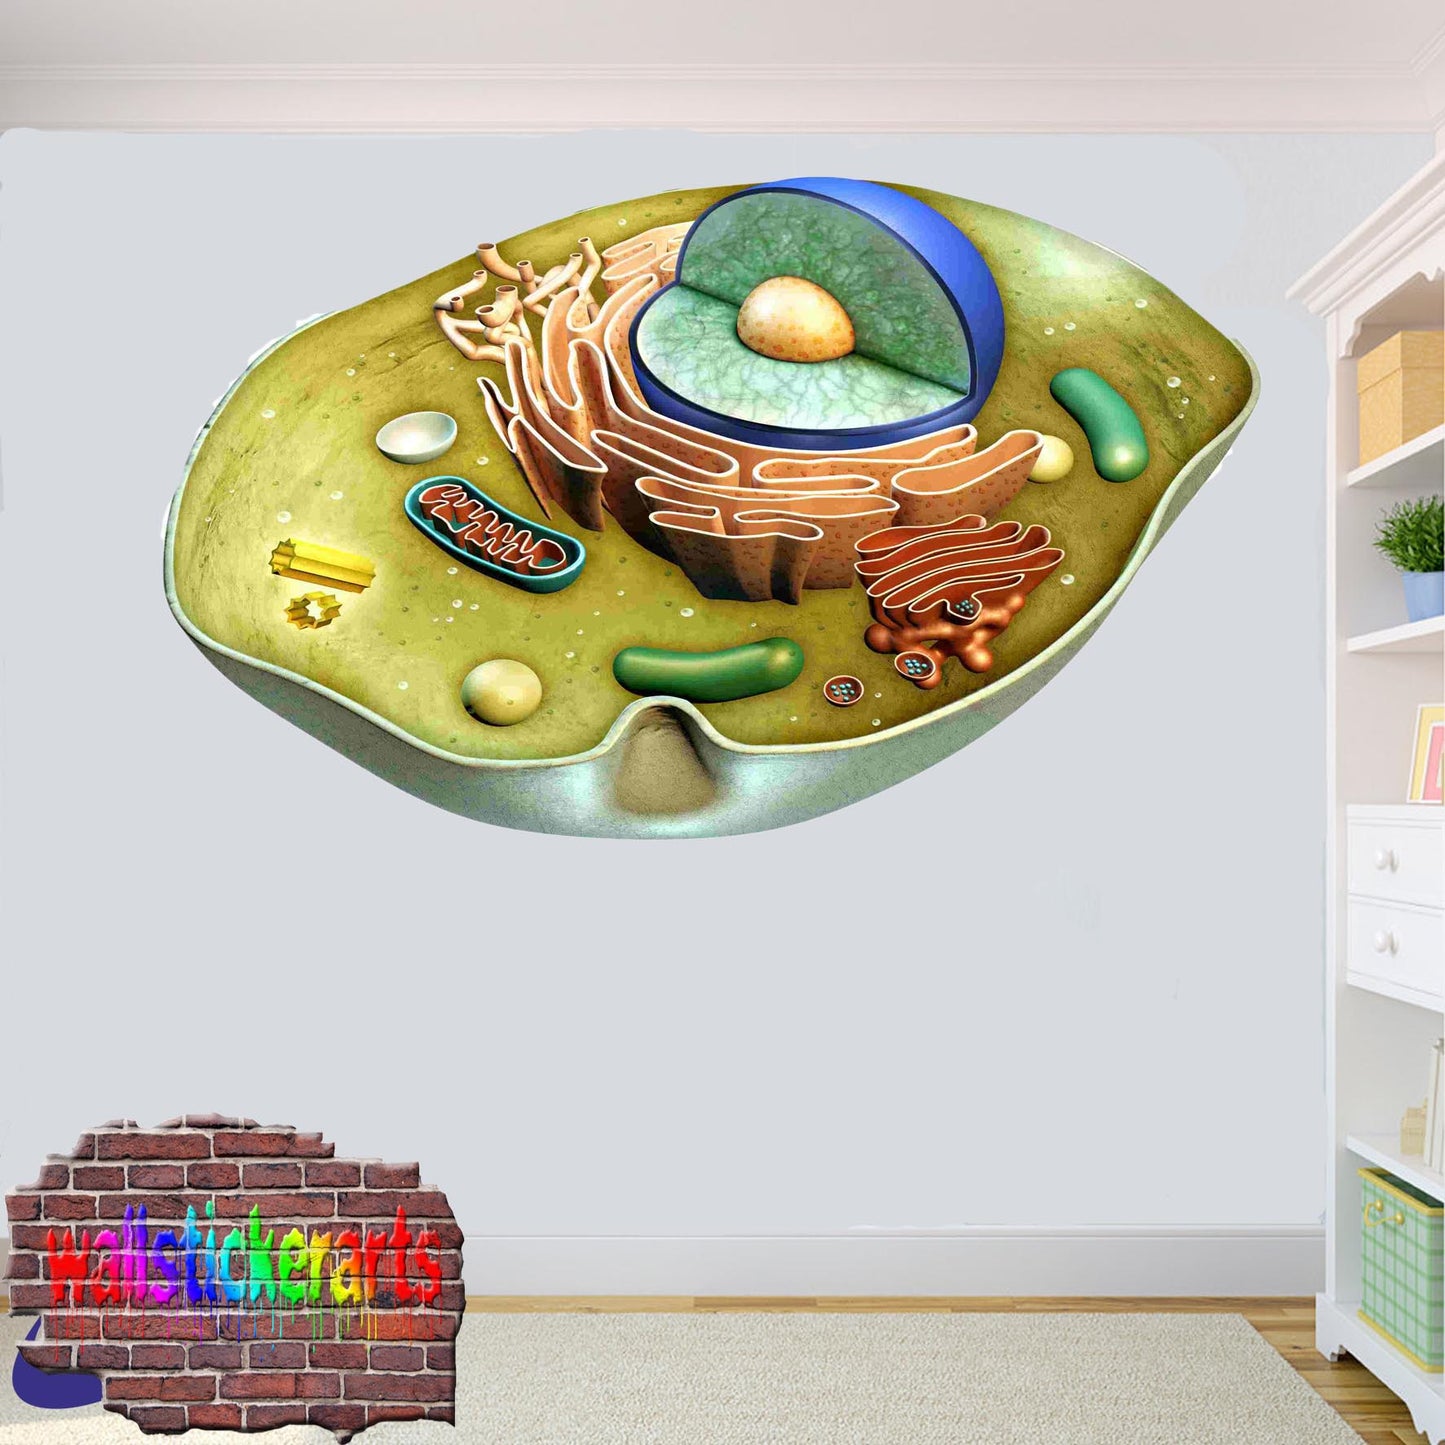 Biology Cell Structure Education 3d Art Smashed Effect Wall Sticker Room Office Nursery Shop Decoration Decal Mural YT1